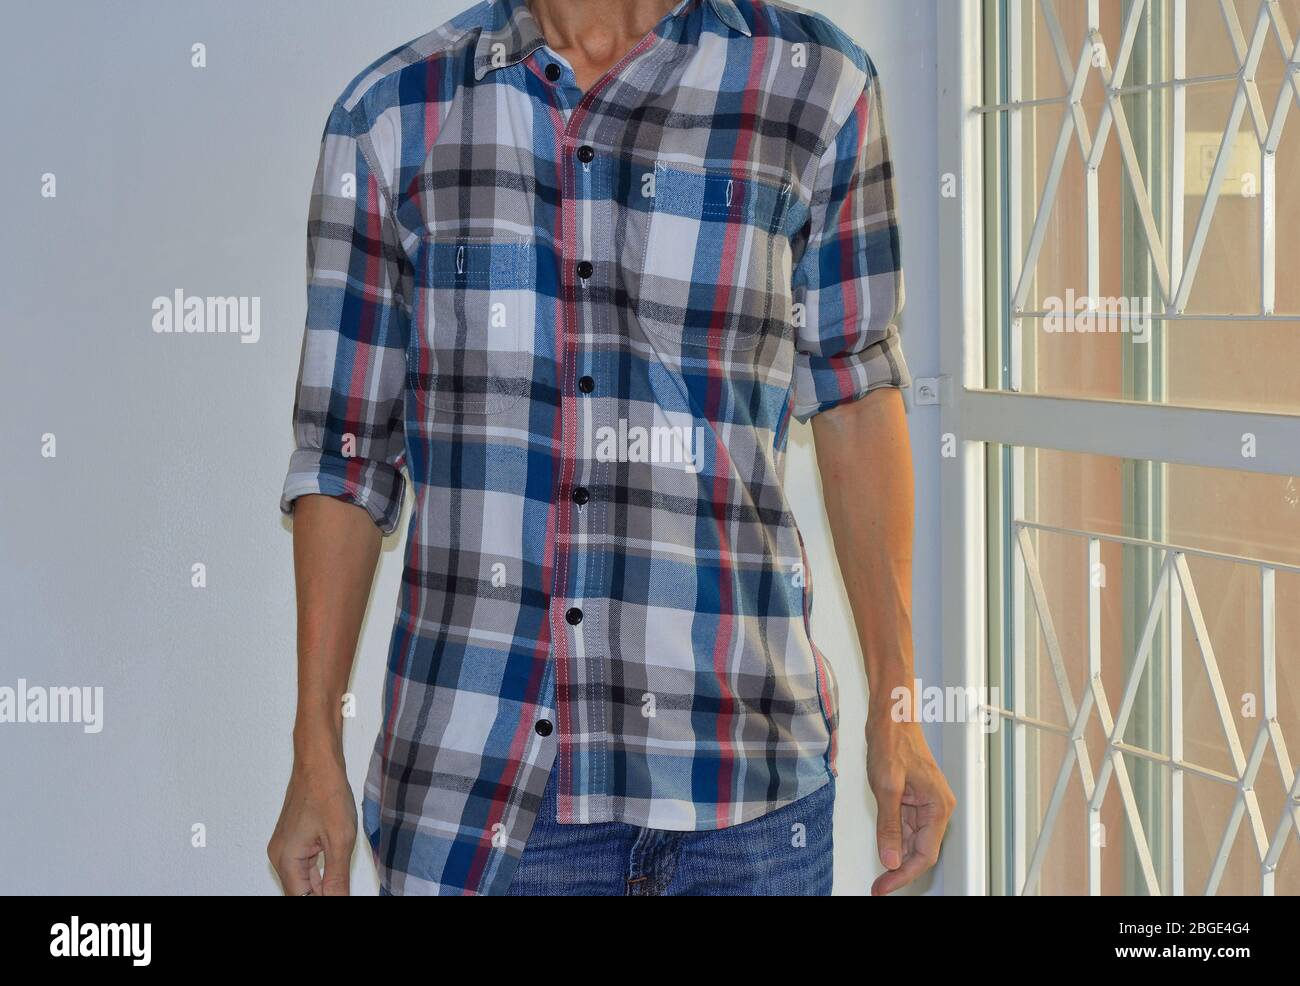 Man wearing buttoned wrong and rolled up sleeves plaid shirt, mistake or intend to break the rule Stock Photo